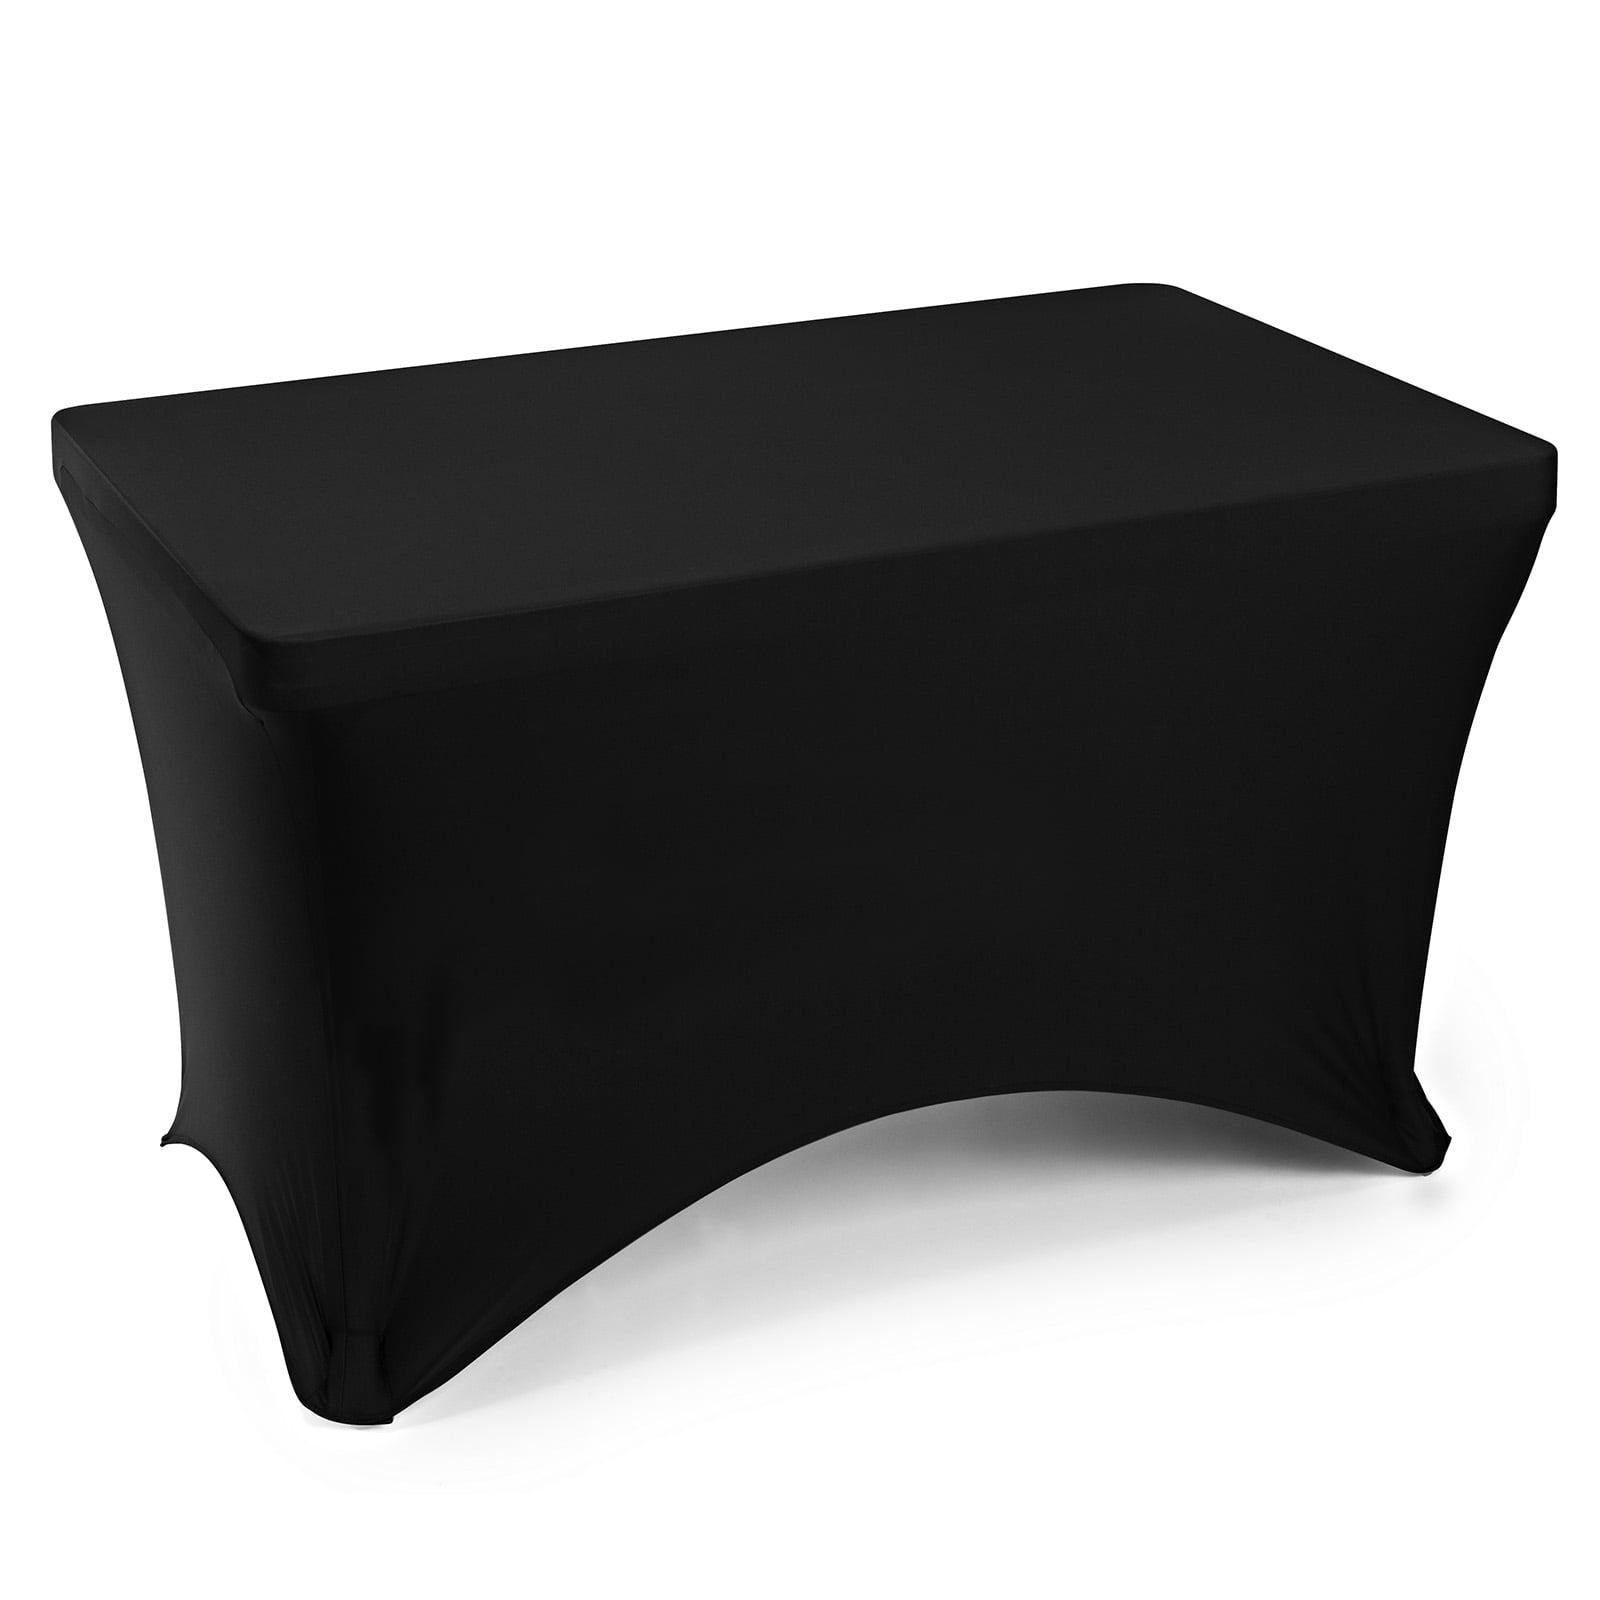 4 ft x 24/" BLACK FITTED POLYESTER TABLE COVER Tablecloth for Wedding Tradeshow